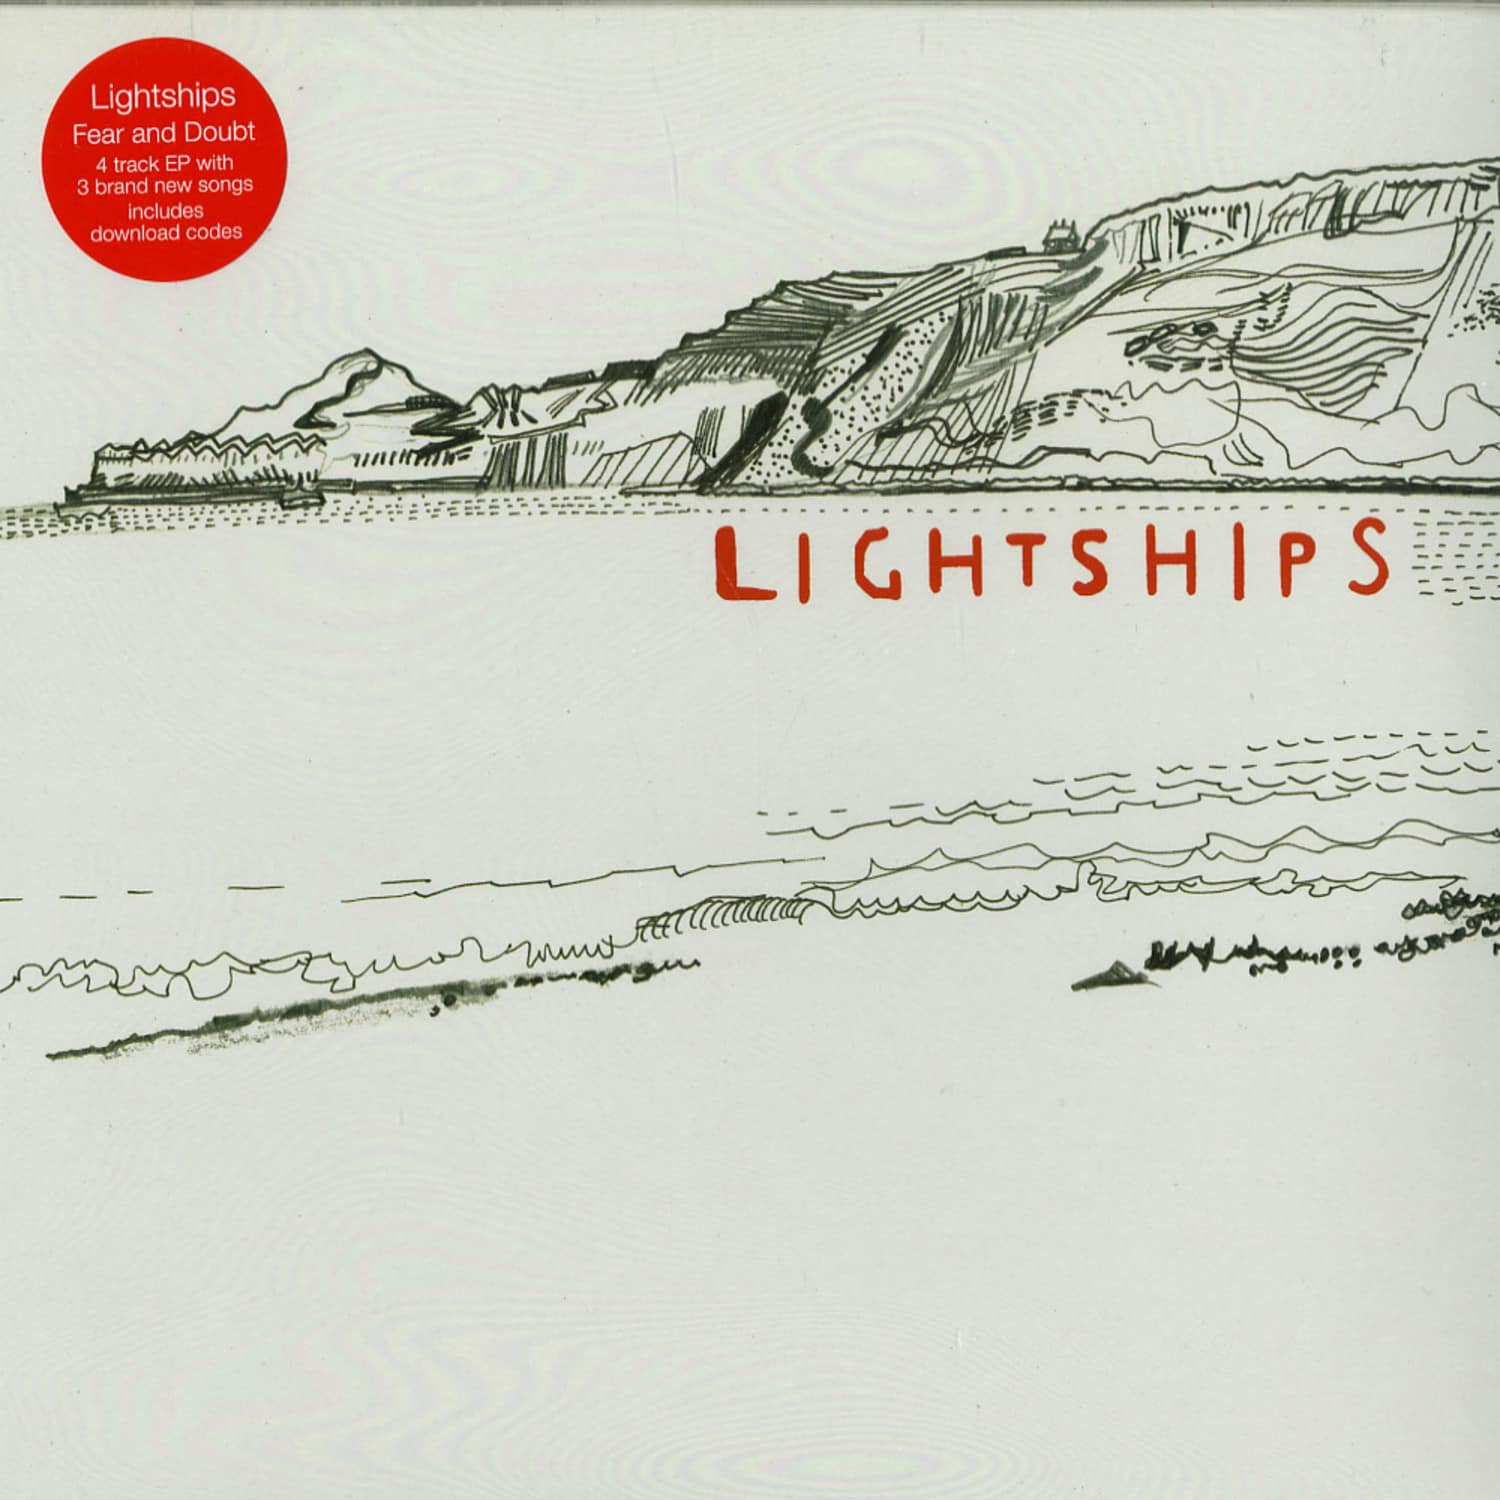 Lightships - FEAR AND DOUBT 